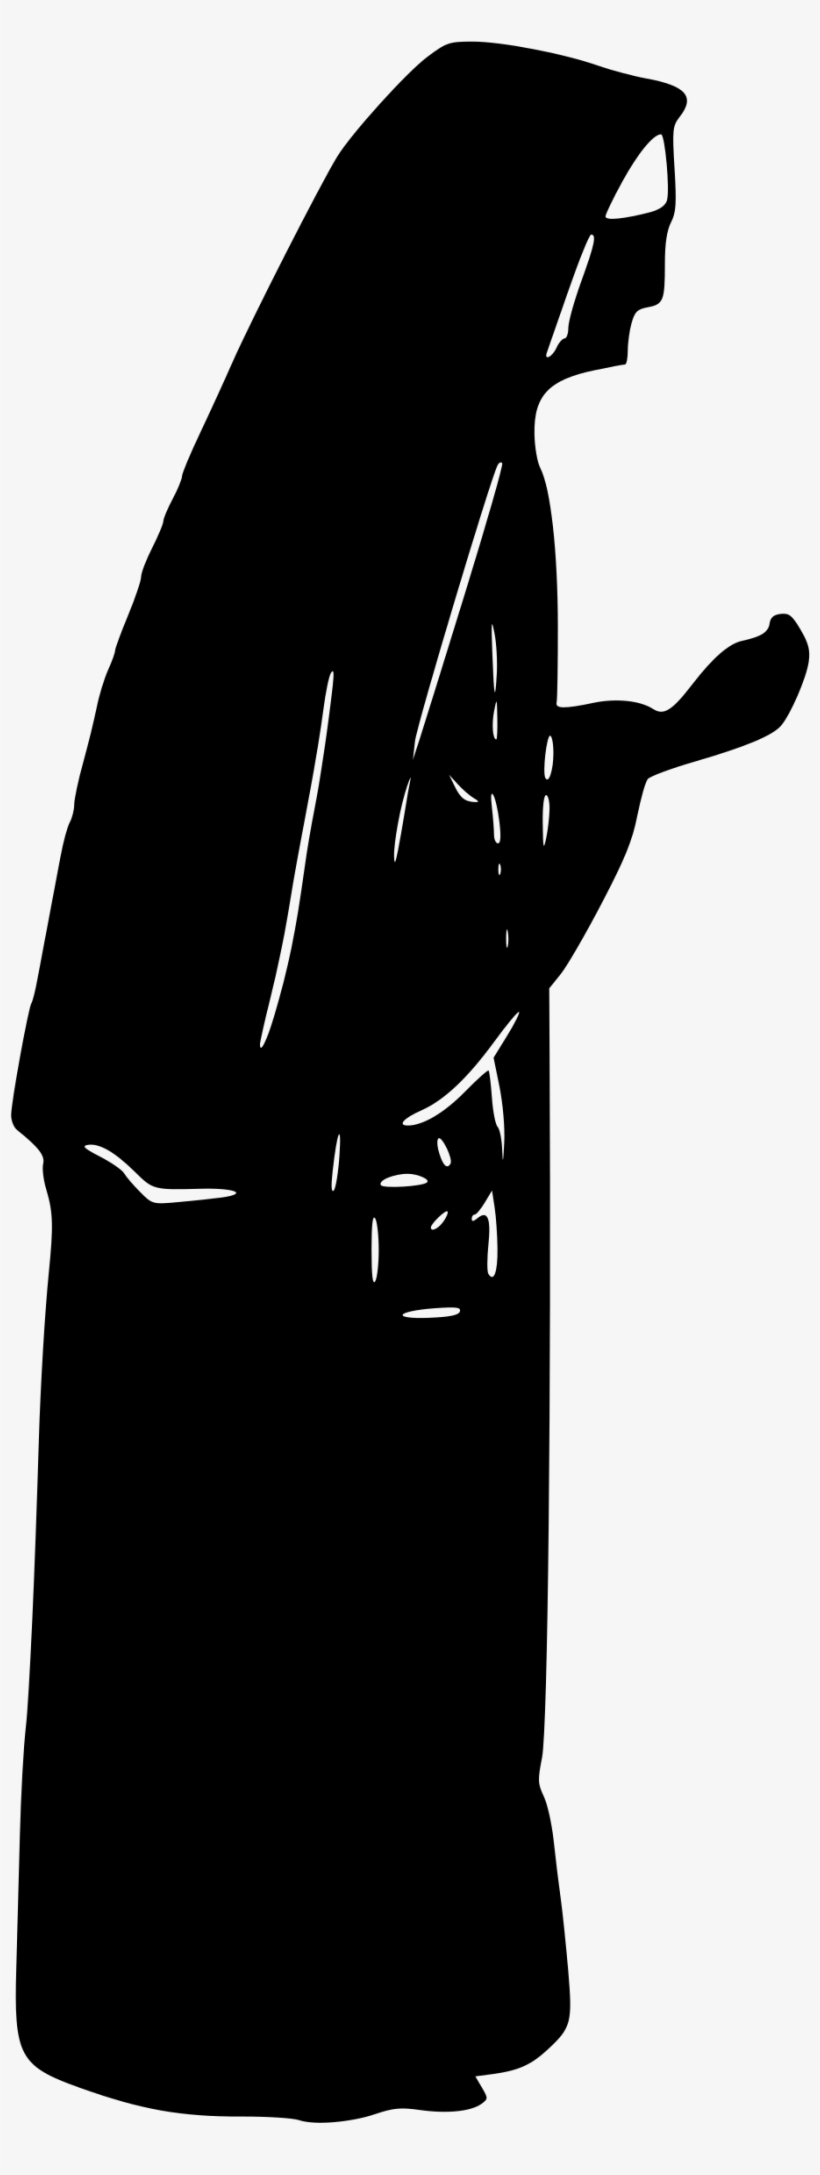 Pitbull Silhouette Png Download - Nun Silhouette, transparent png #743057